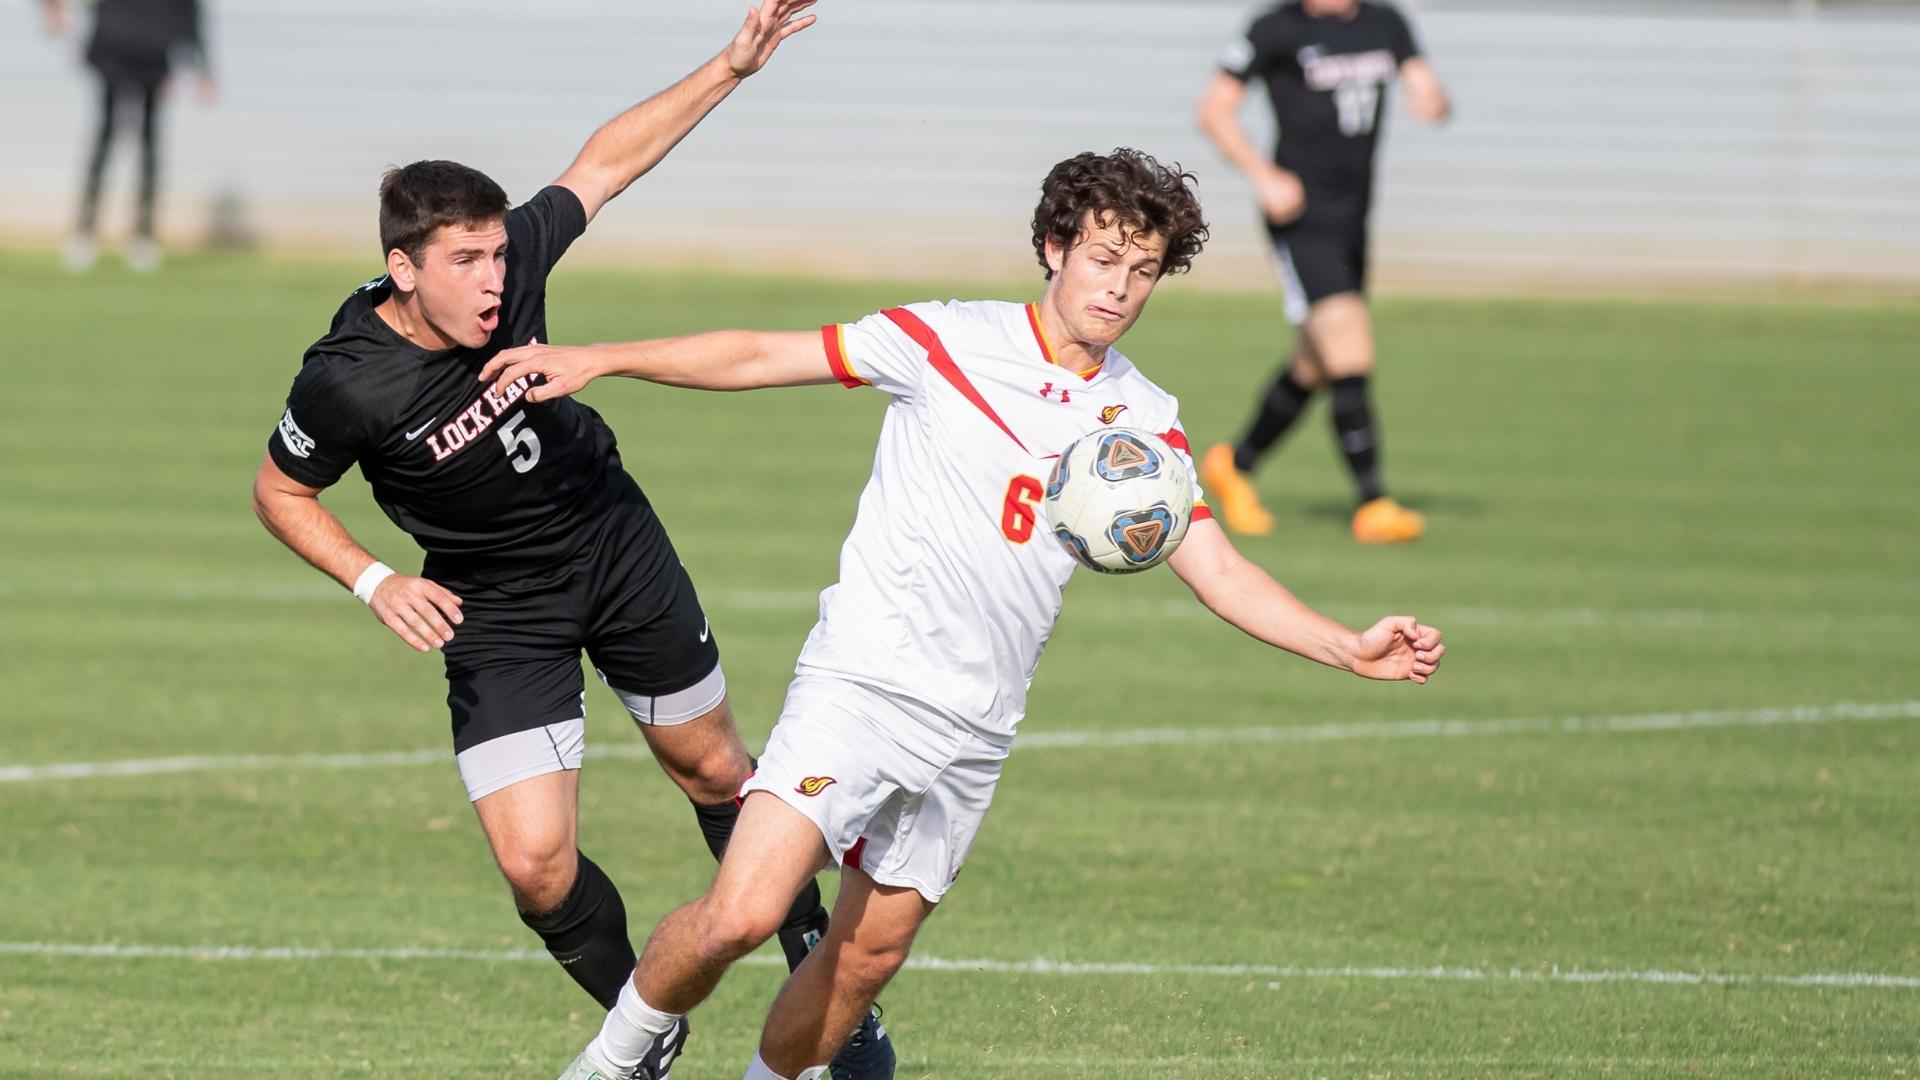 UDC Men's Soccer Closes Out Regular Season Play at Home in Winning Fashion